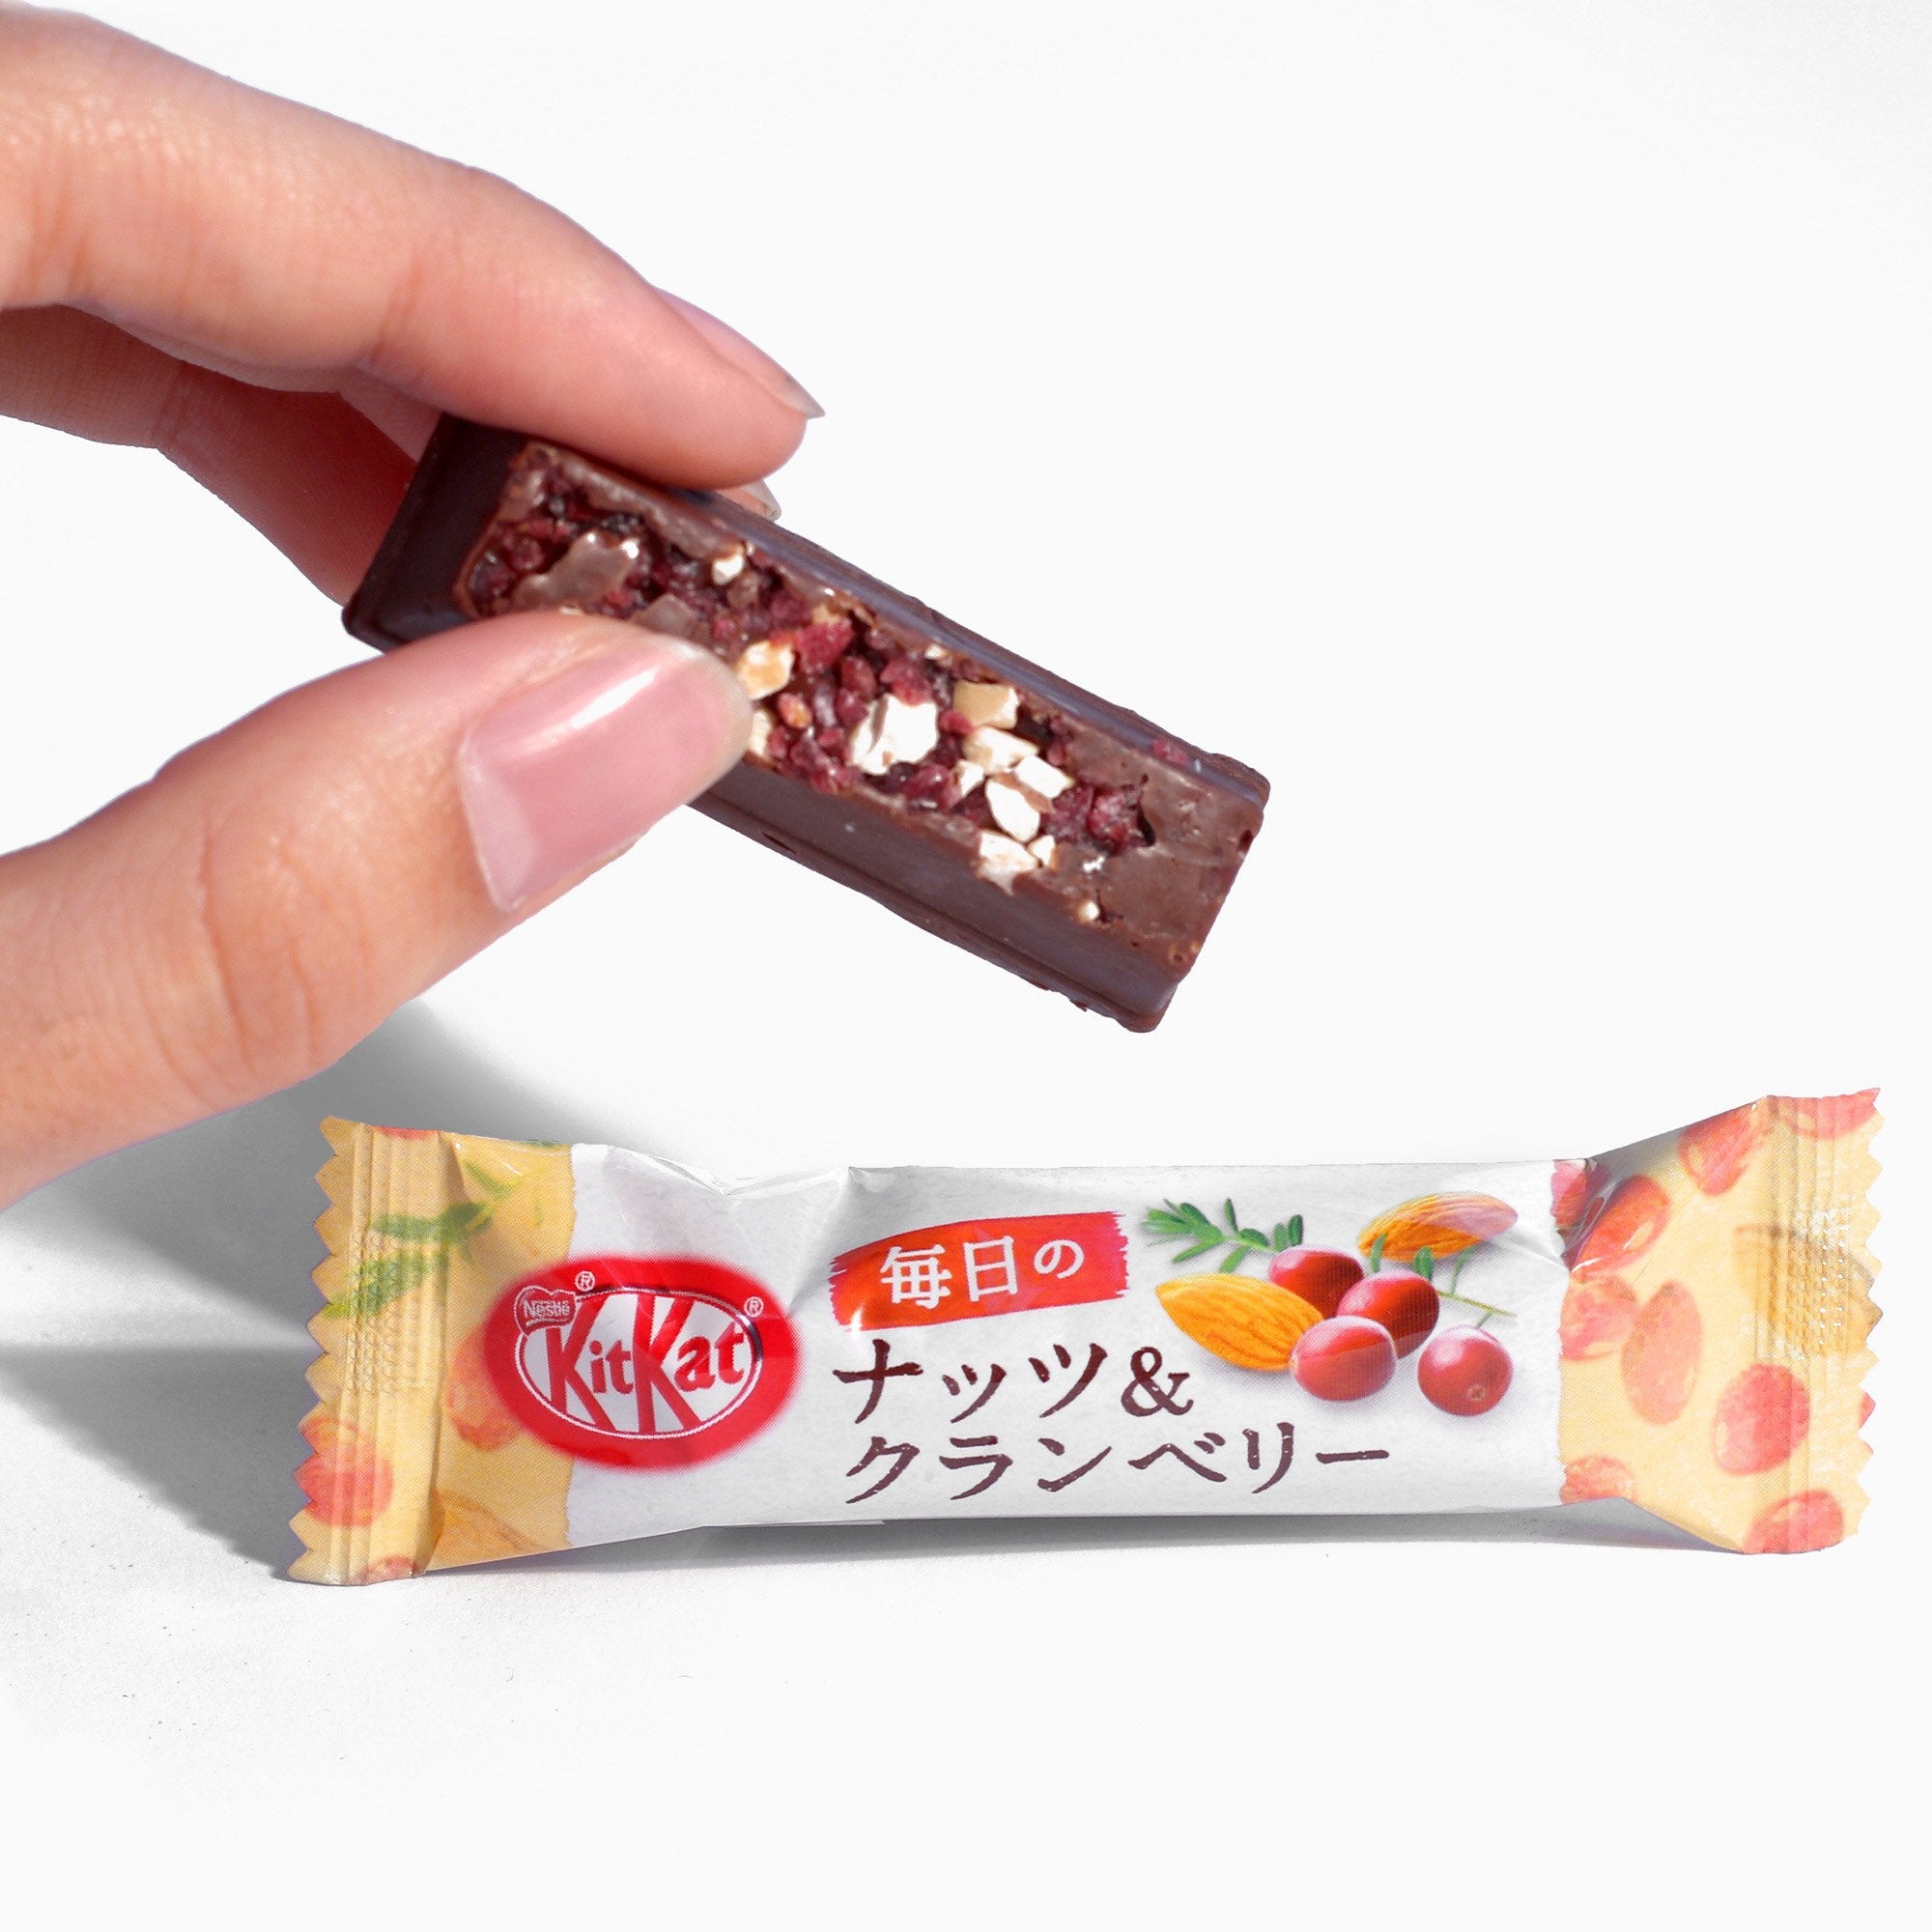 An opened Almond & Cranberry Kit Kat Chocolate Bar being held with hand and the other as a singular unopened Almond & Cranberry Kit Kat Chocolate Bar.